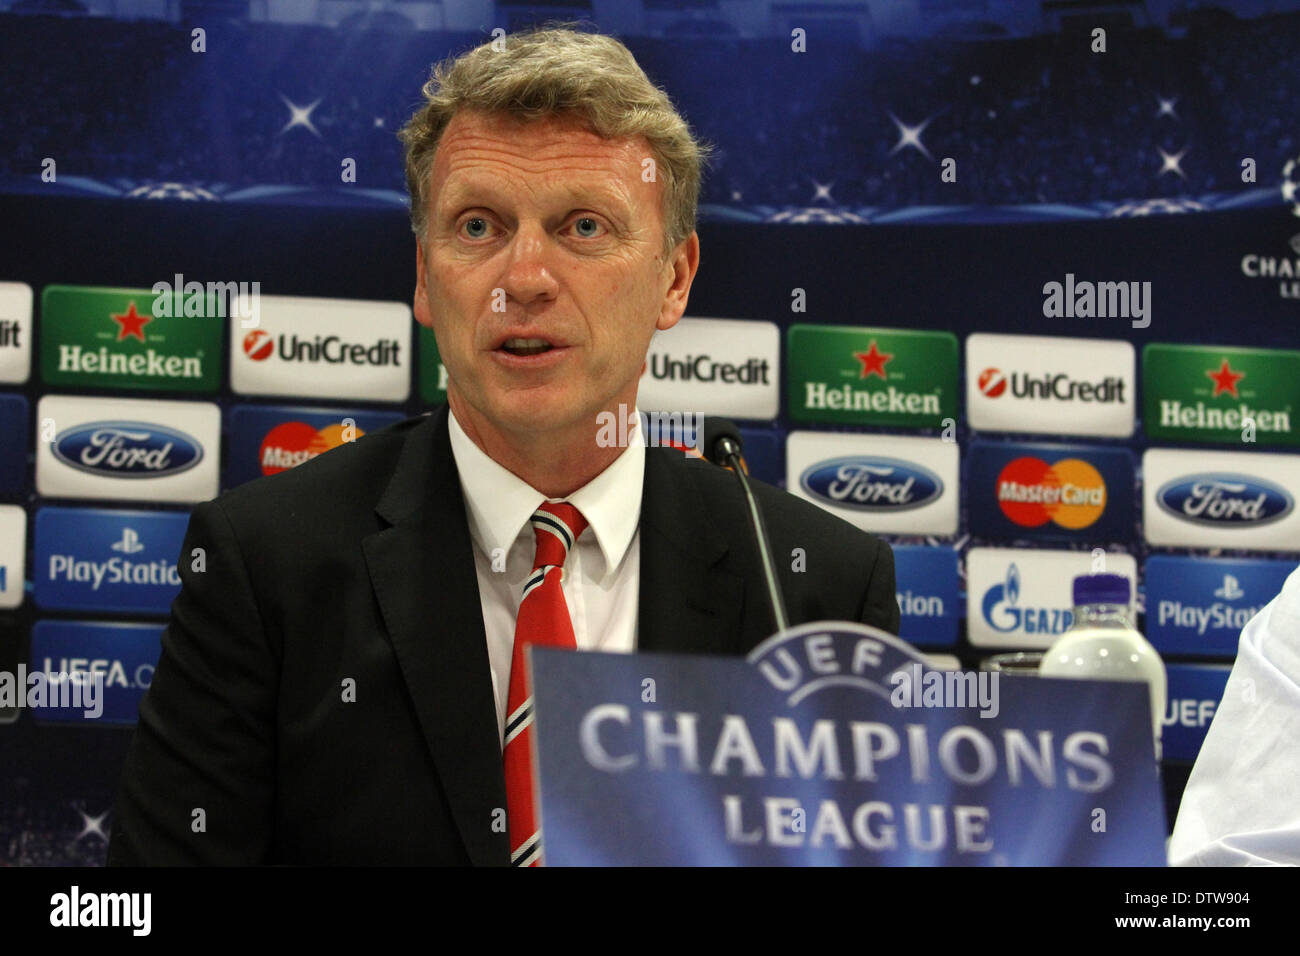 Greece,Athens-February 24,2014:Manchester United's coach David Moyes during  the press conference for the UEFA Champions League Last 16, first leg  football match between Olympiakos and Manchester United at the Karaiskaki  stadium in Piraeus